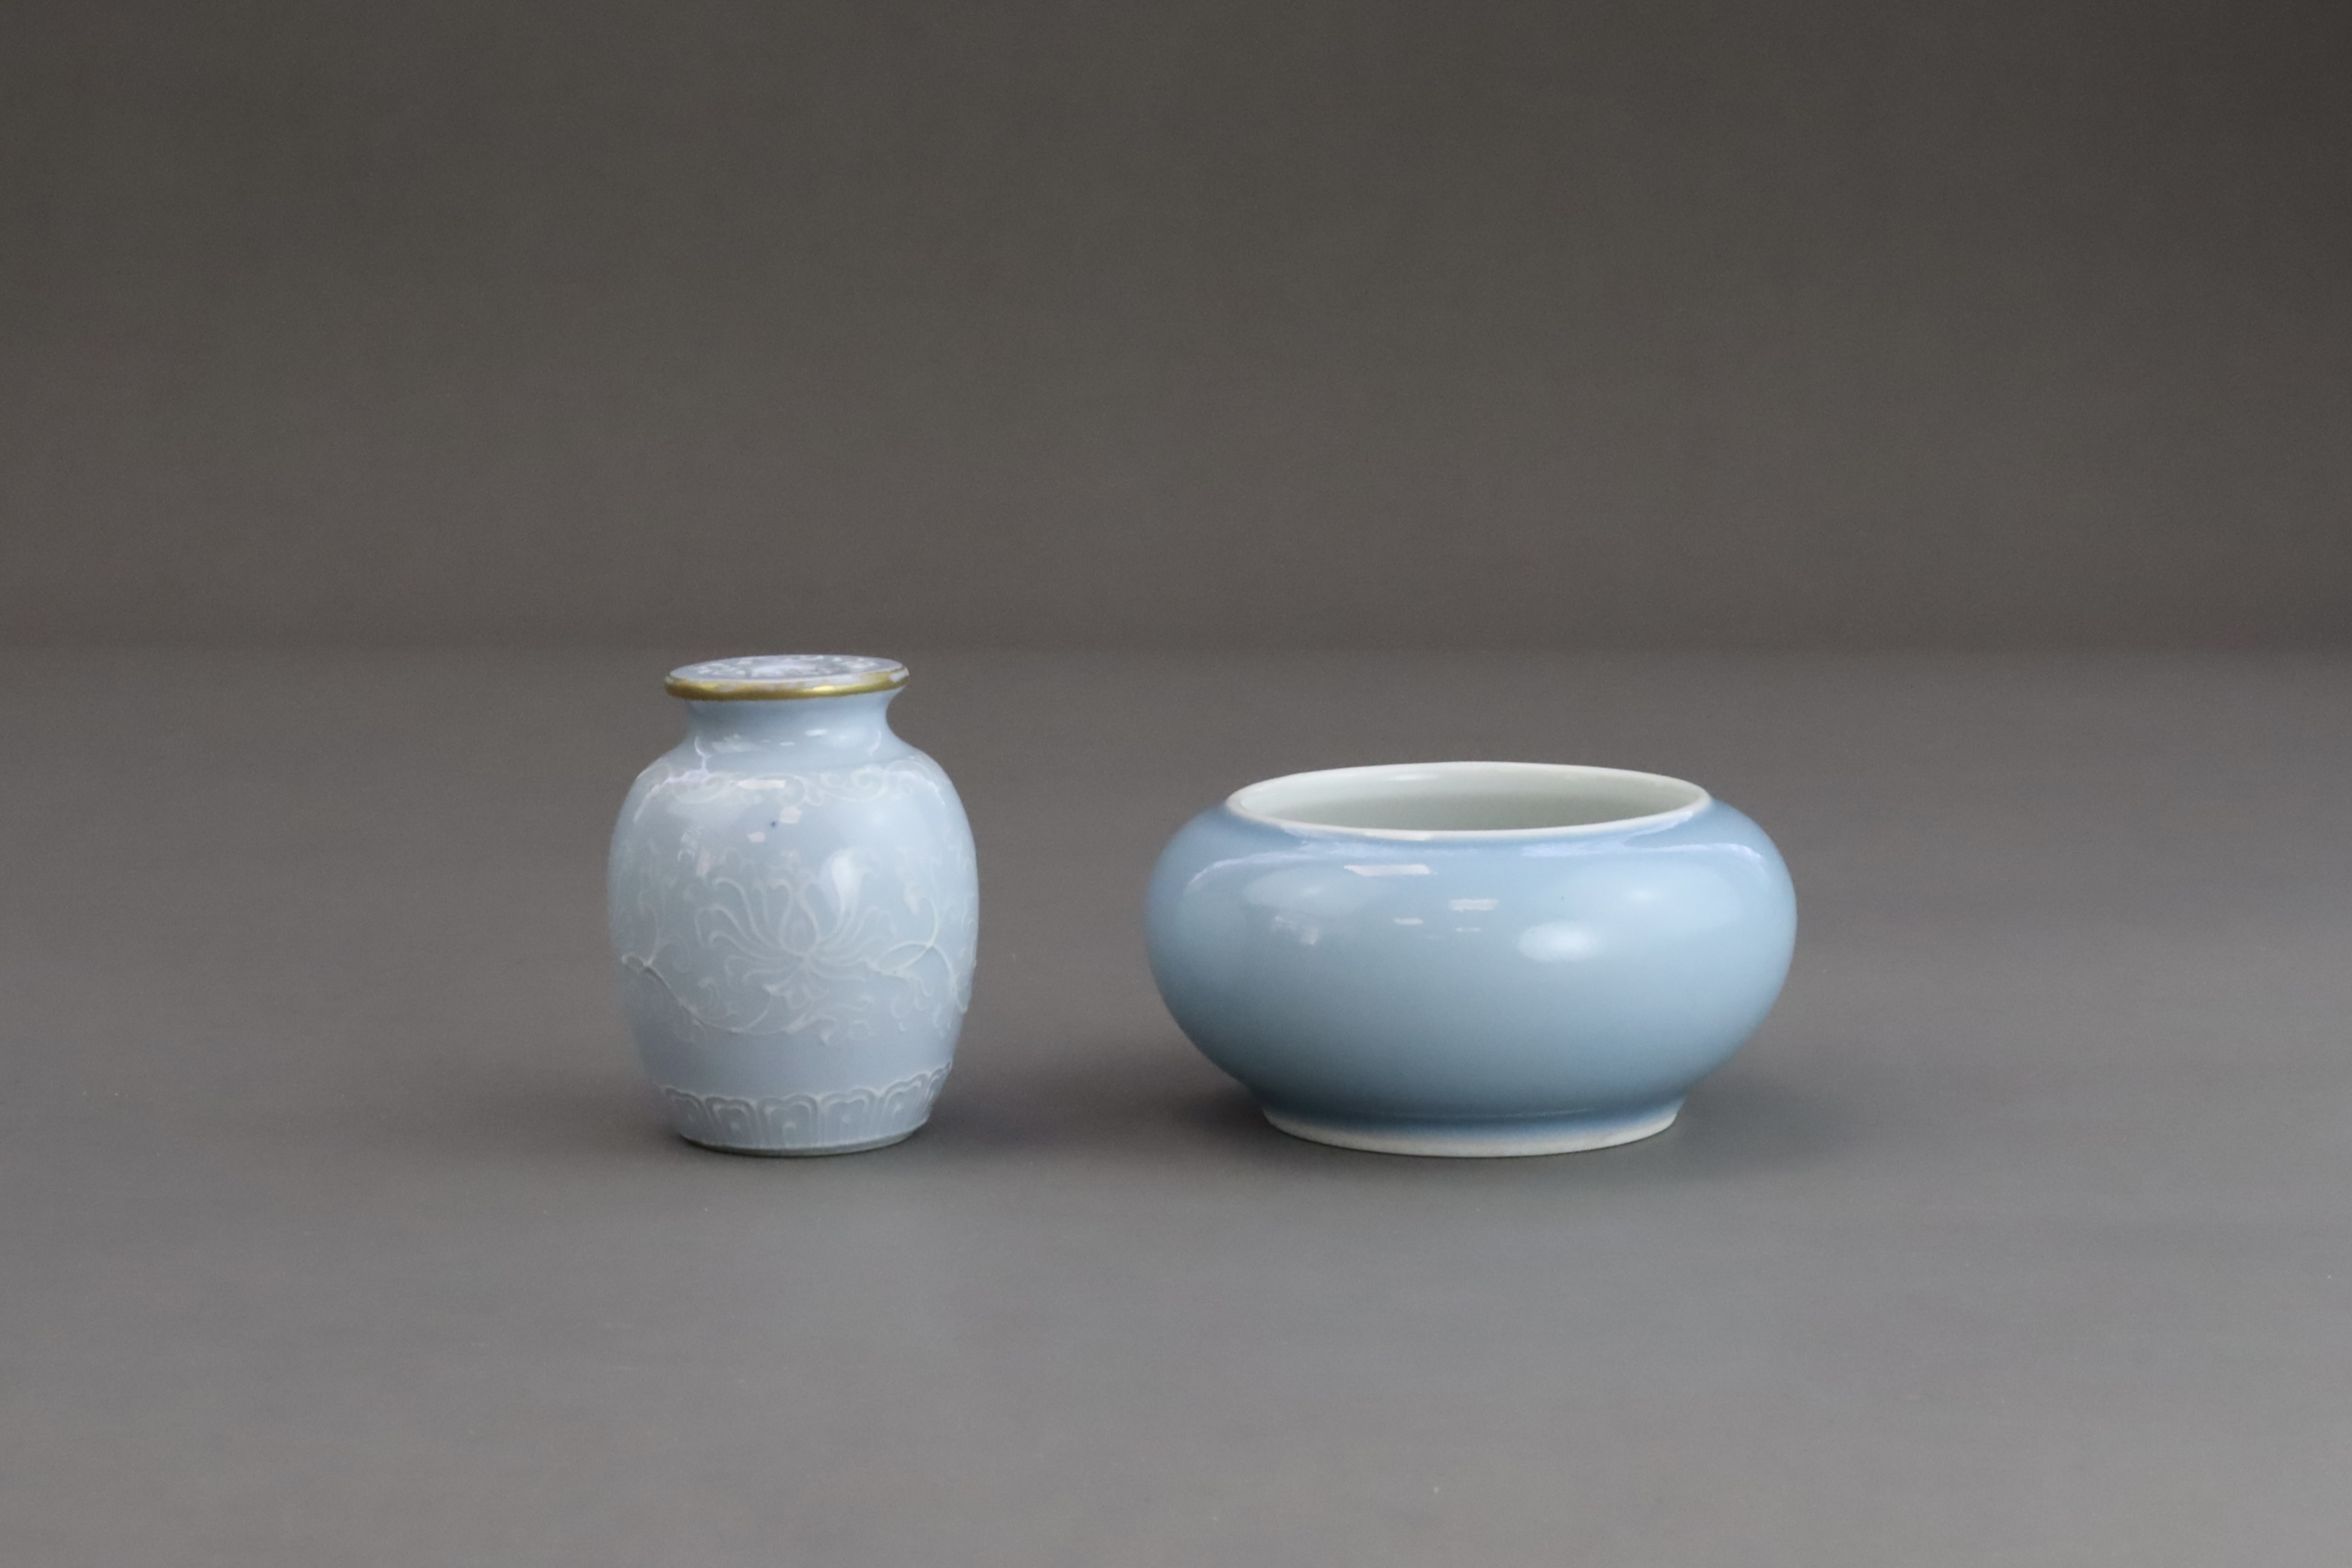  'Clair de lune': A Brushwasher, Guangxu mark and period, and a Moulded small Jar, Qing dynasty - Bild 4 aus 7